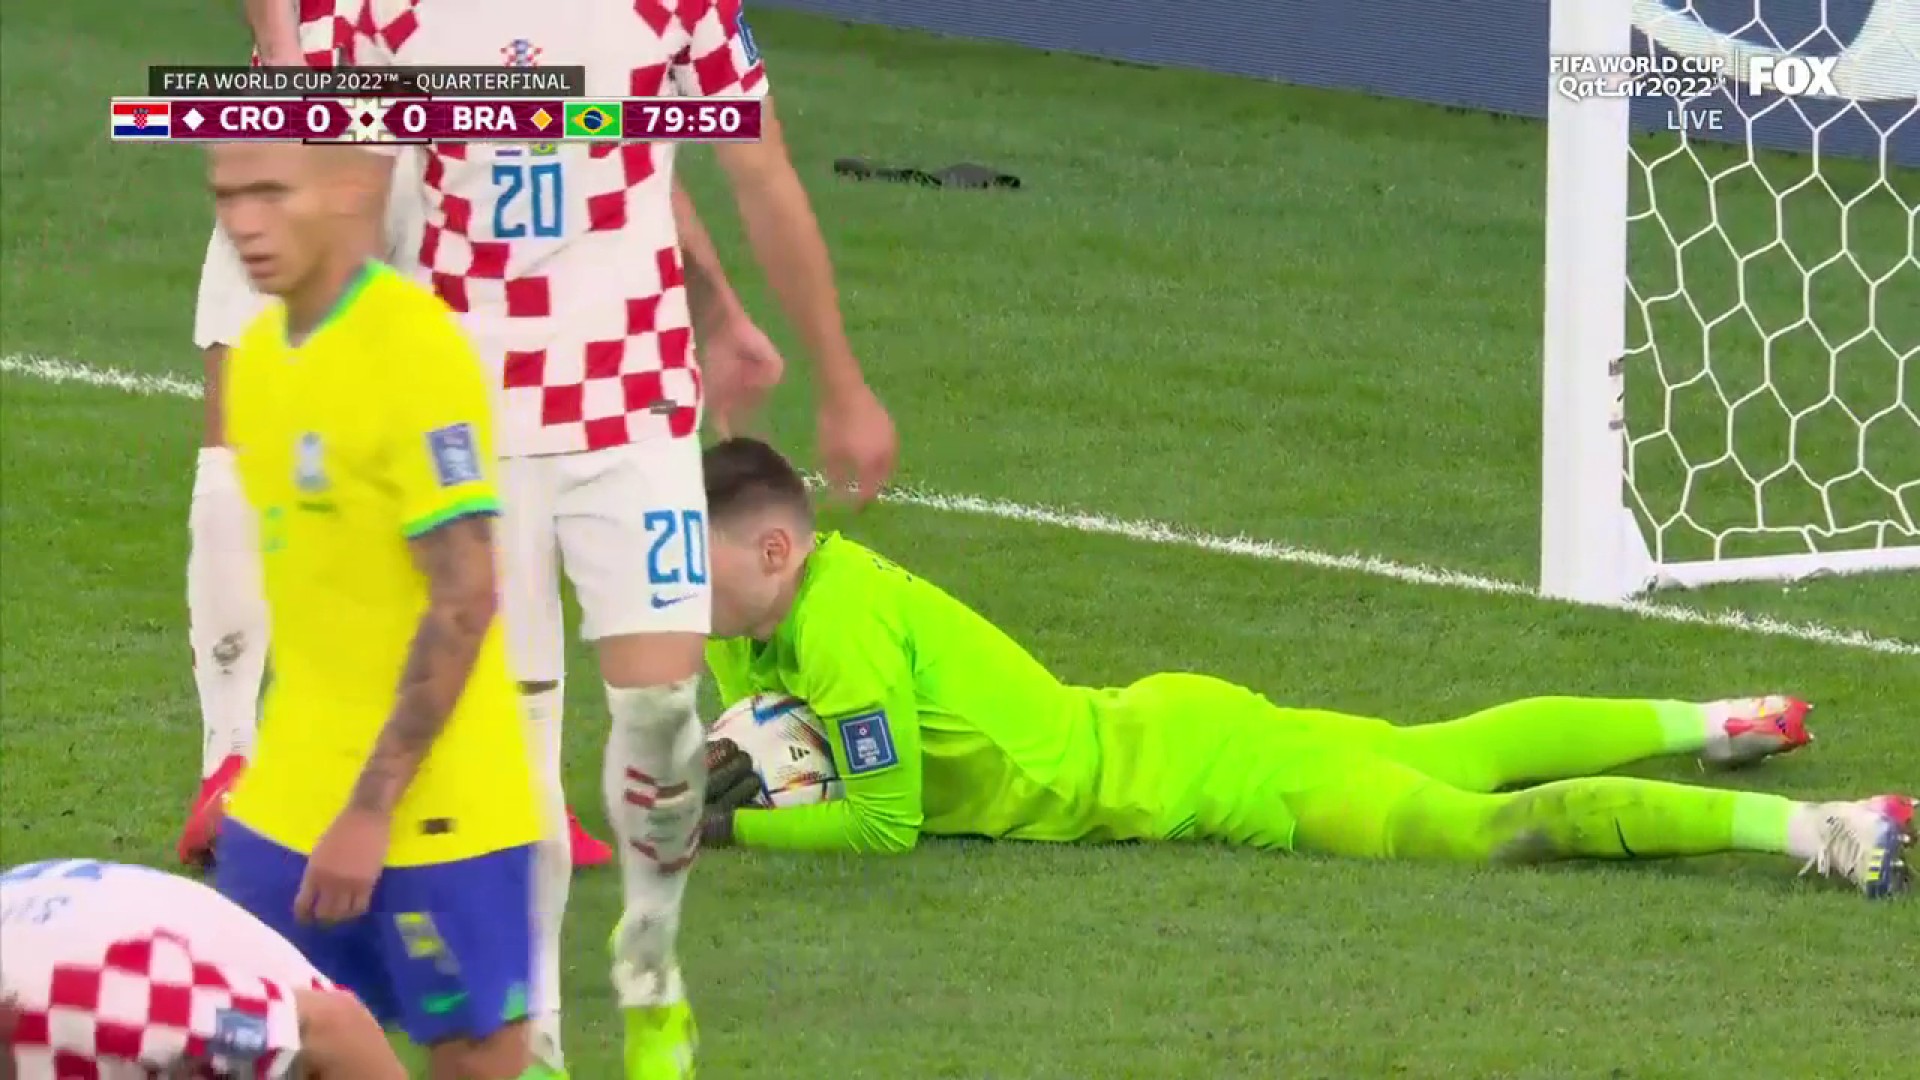 Another chance for Brazil, another Livaković save 🔒”